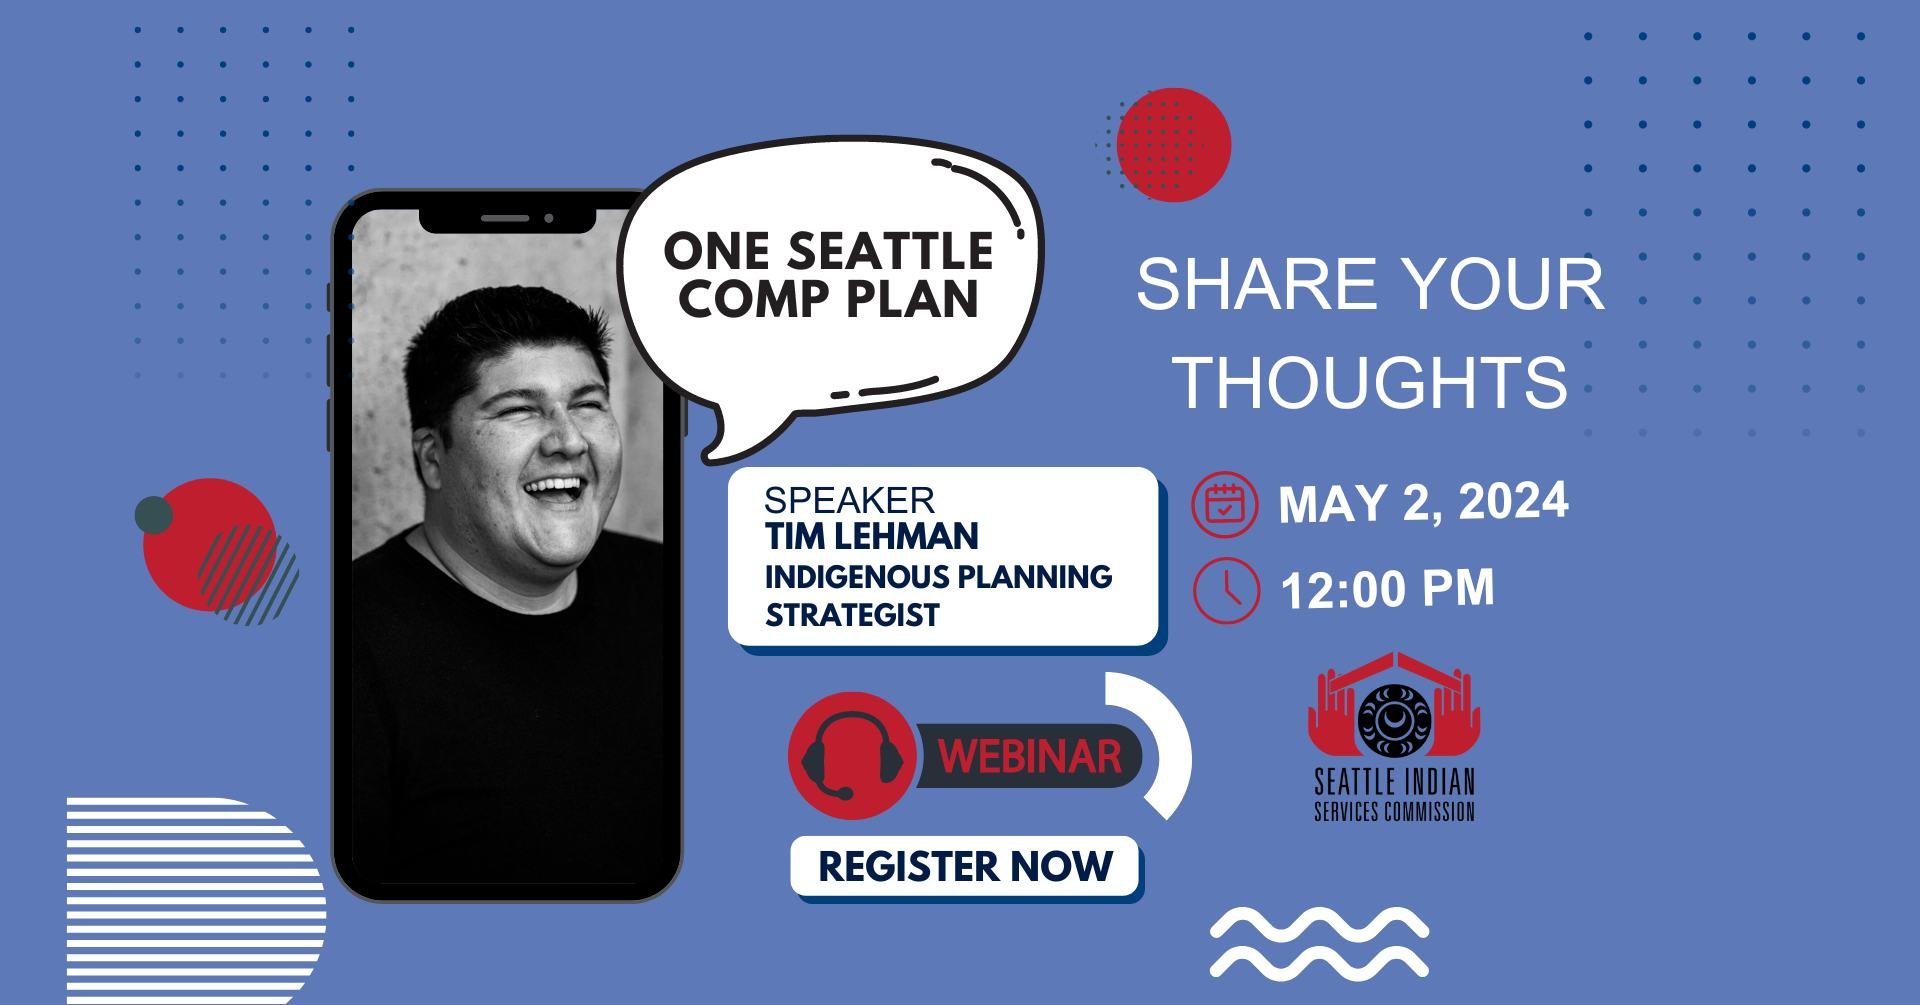 Register for One Seattle Comprehensive Plan webinar with Tim Lehman
Join us for a lunchtime chat with Tim Lehman,  Indigenous Planning Strategist at the Office of Planning and Community Development. Tim will teach about the purpose and importance of 